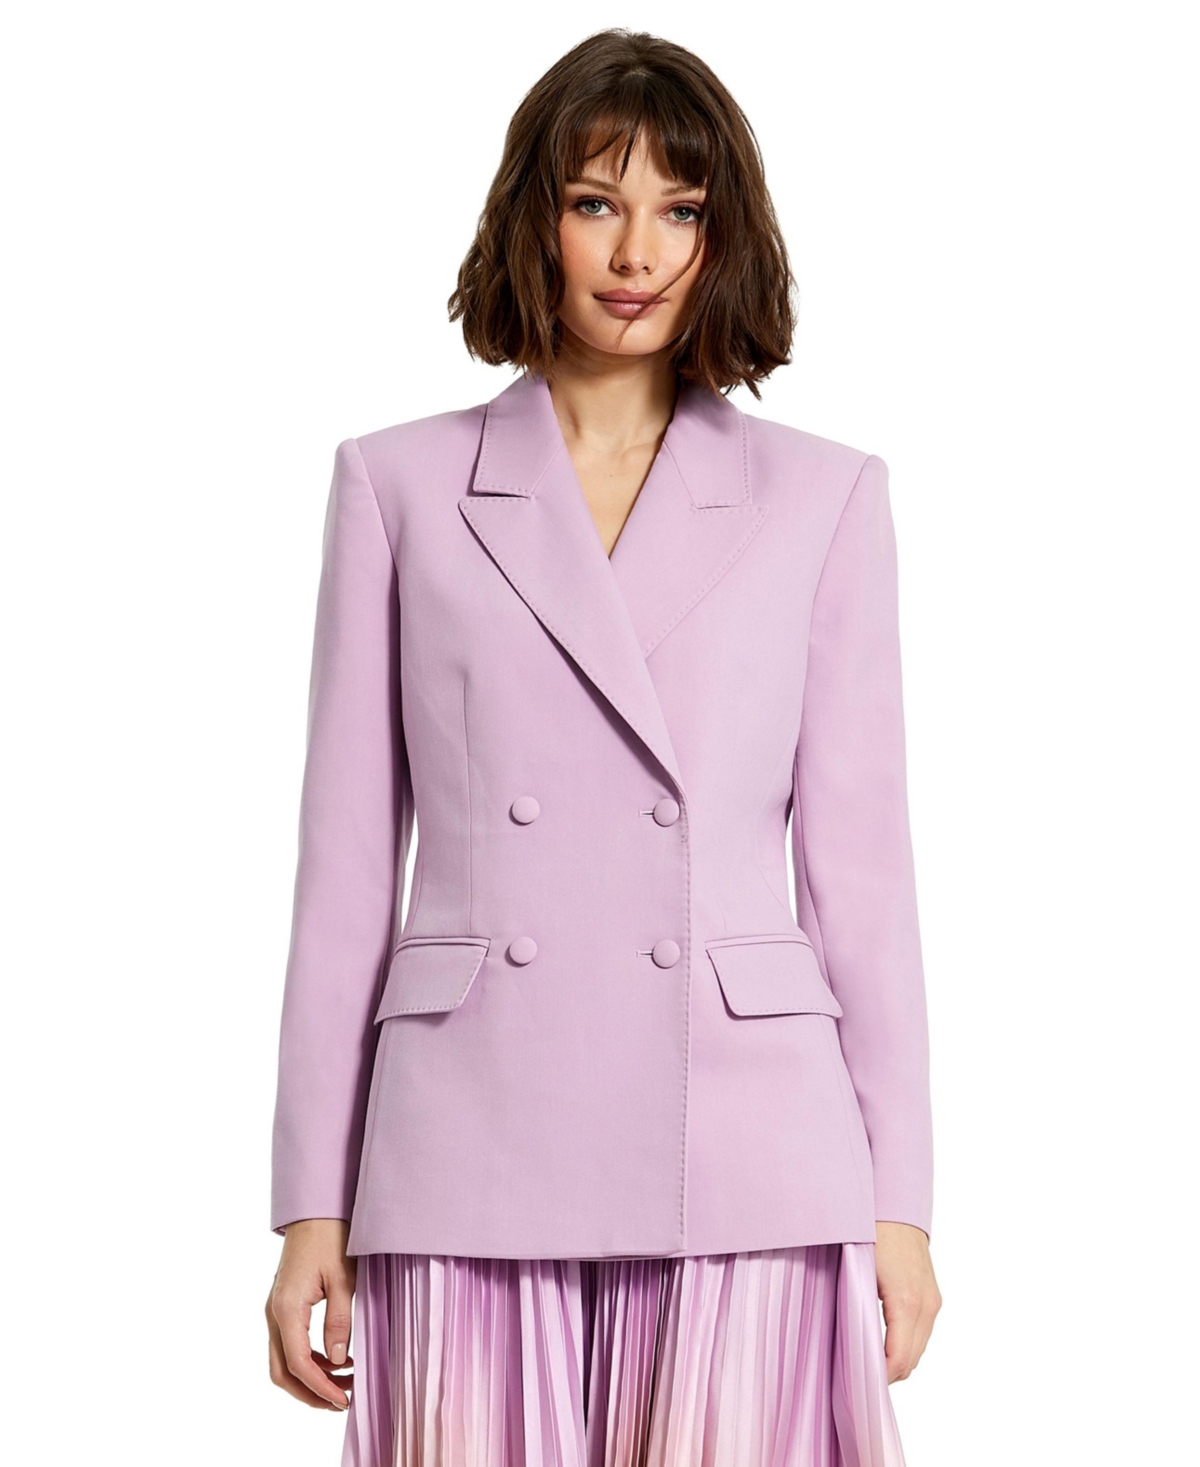 Women's Classic Crepe Double Breasted Blazer - Orchid